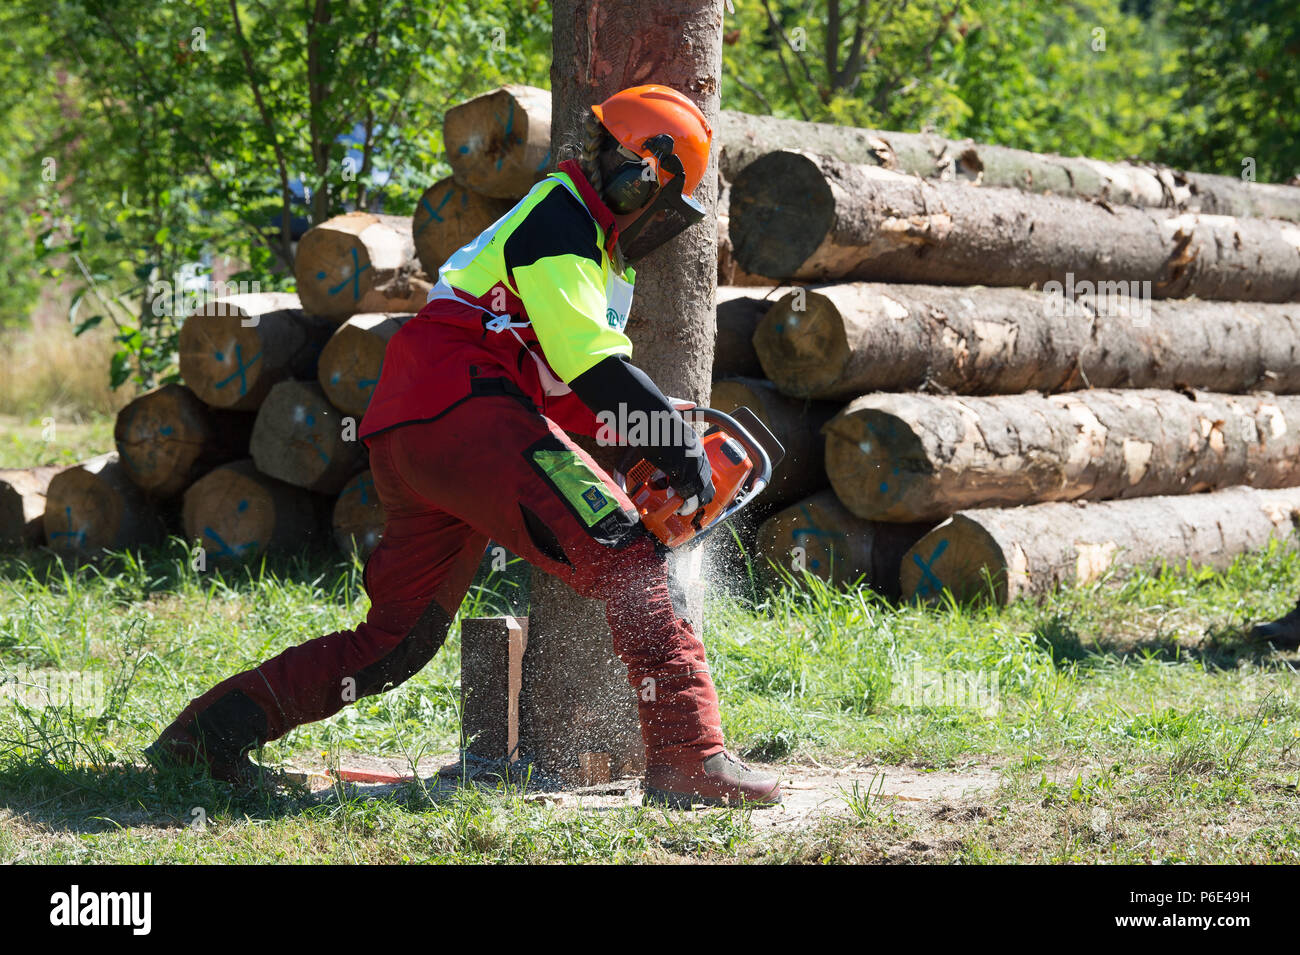 Seesen, Germany. 30th June, 2018. Ida Klaus, starter in the Chainsaw Cup, completes the discipline 'Mastenfaellen' (lit. mast felling). Arround 55 participants are competing for the title of 'Niedersaechsischer Waldarbeitsmeister' (lit. Lower Saxony Forestry Champion). Credit: Swen Pförtner/dpa/Alamy Live News Stock Photo